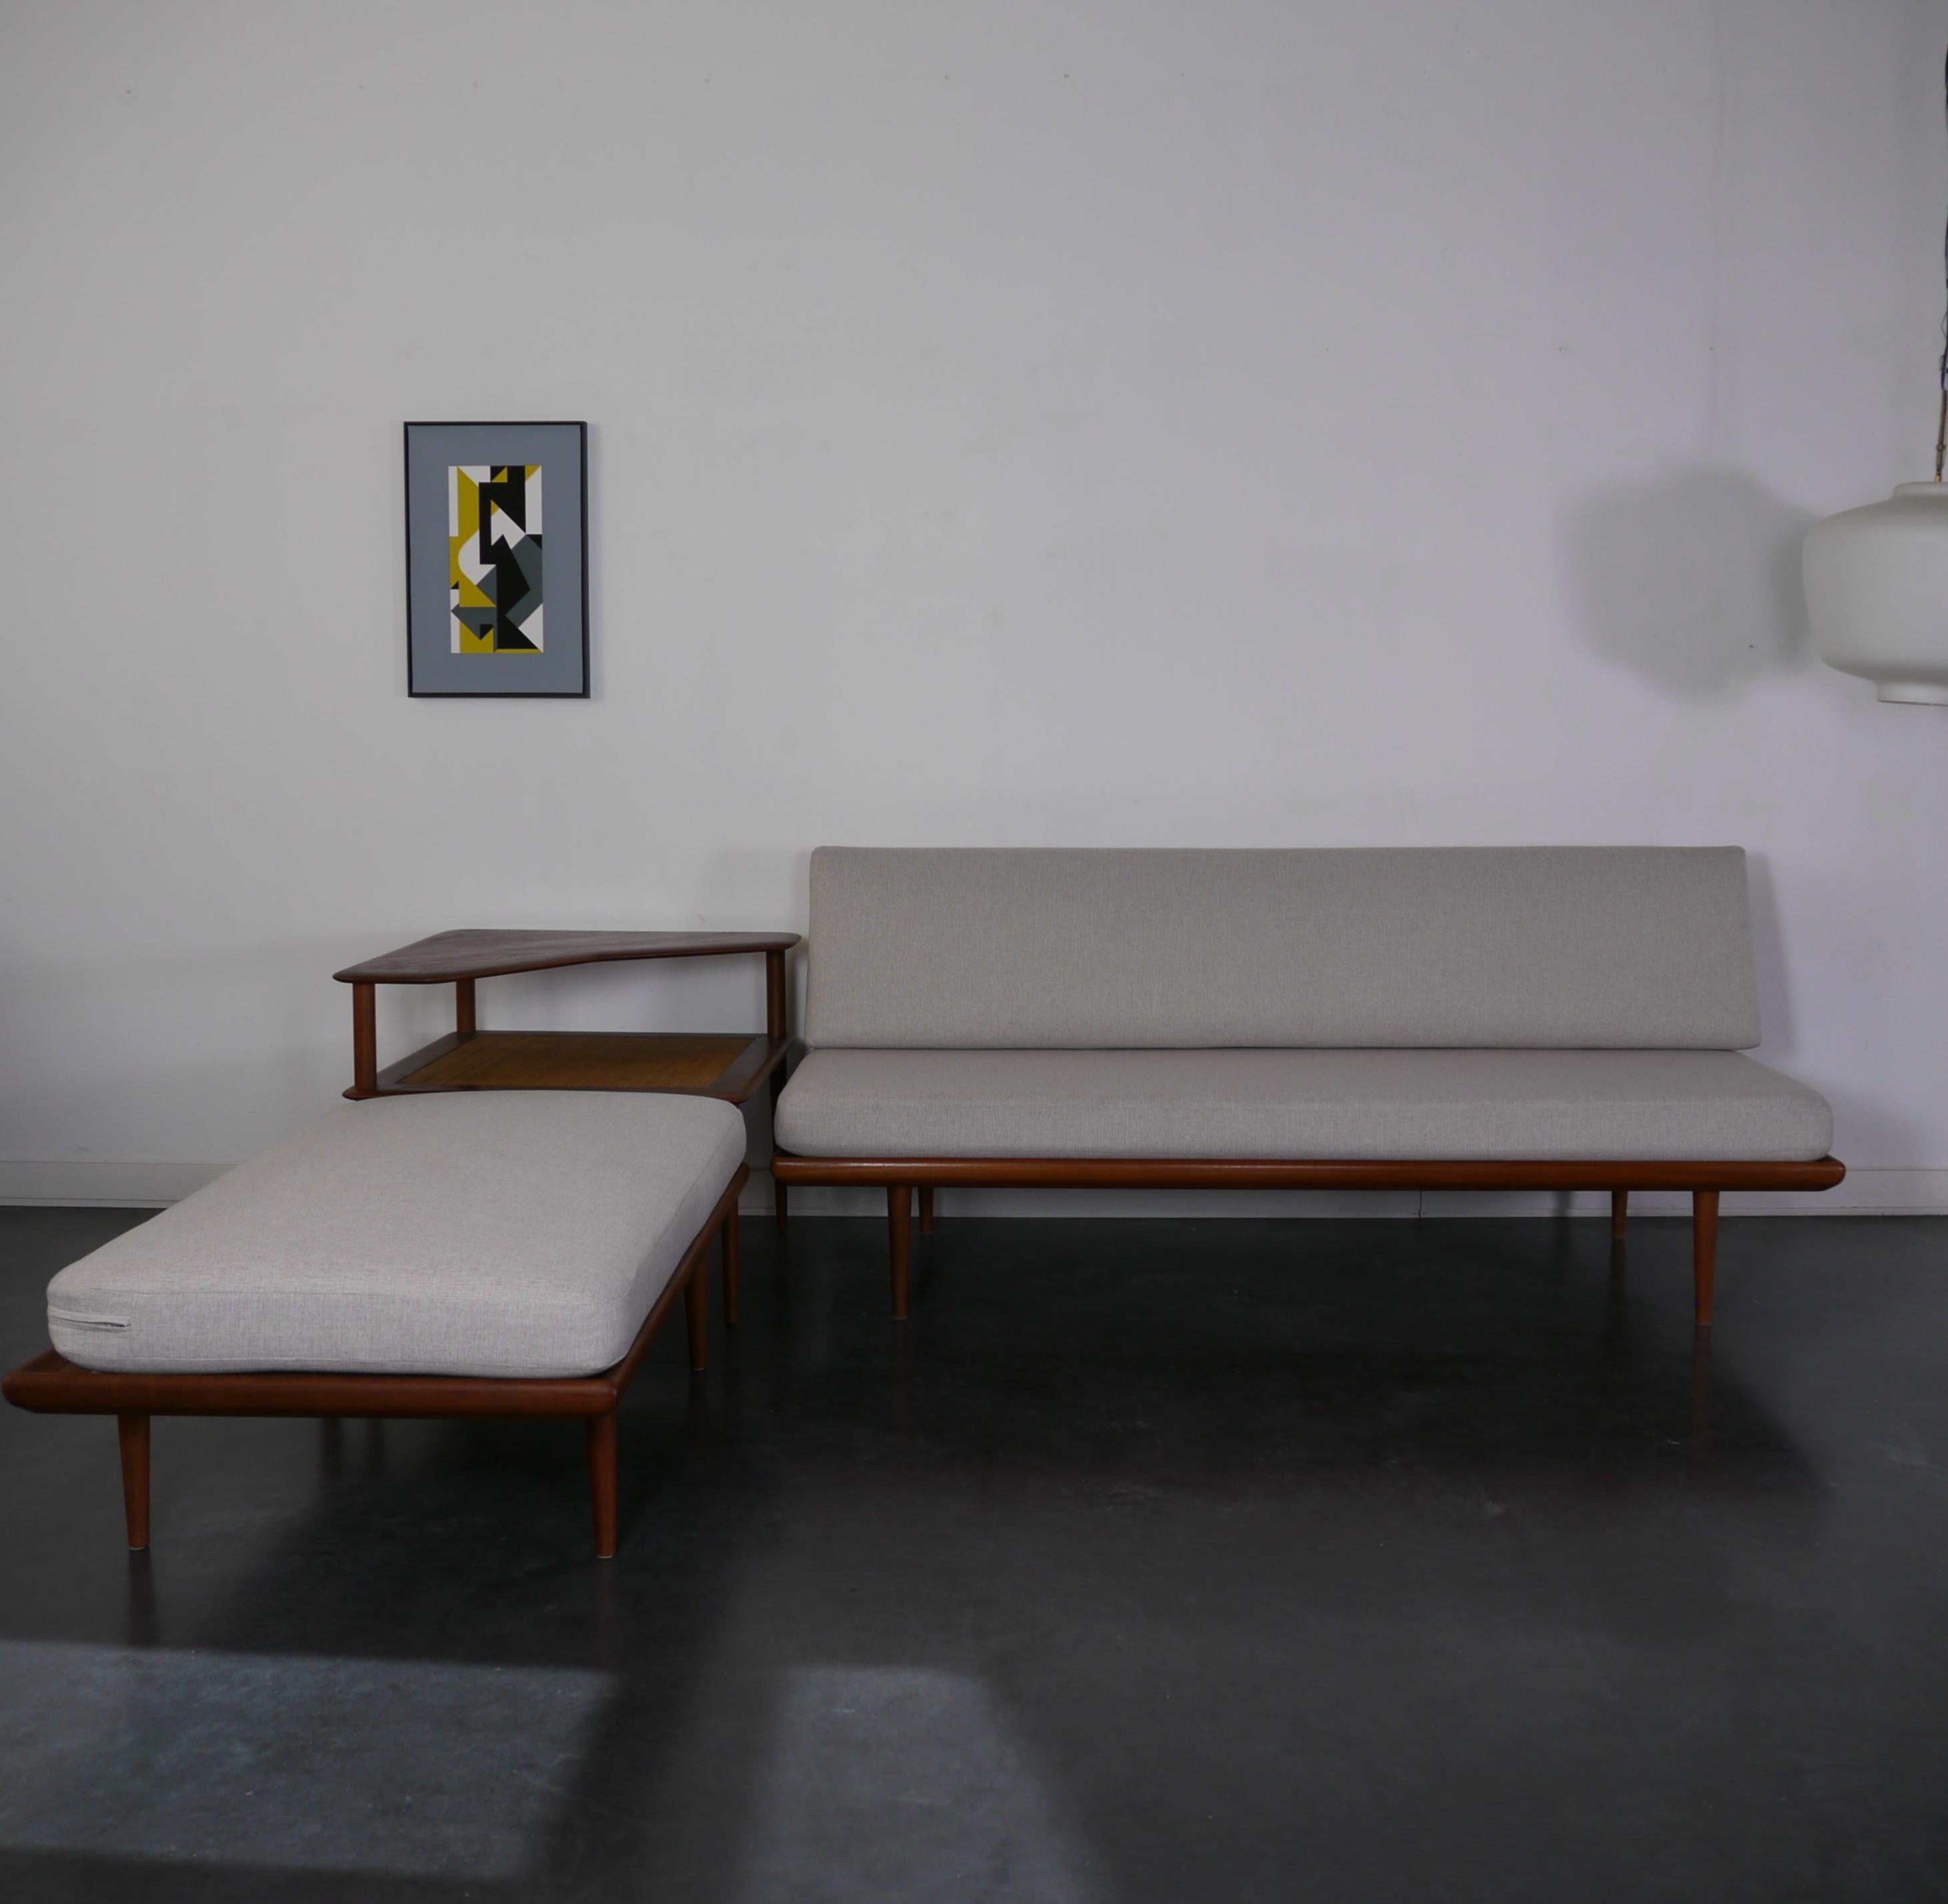 This modular living room set was designed by the Danish architects Peter Hvidt & Orla Mølgaard Nielsen. It was produced in Denmark by France & Daverkosen during the 1950's. The set includes one 2-seater sofa model FD 418a, a 3-seater sofa model FD